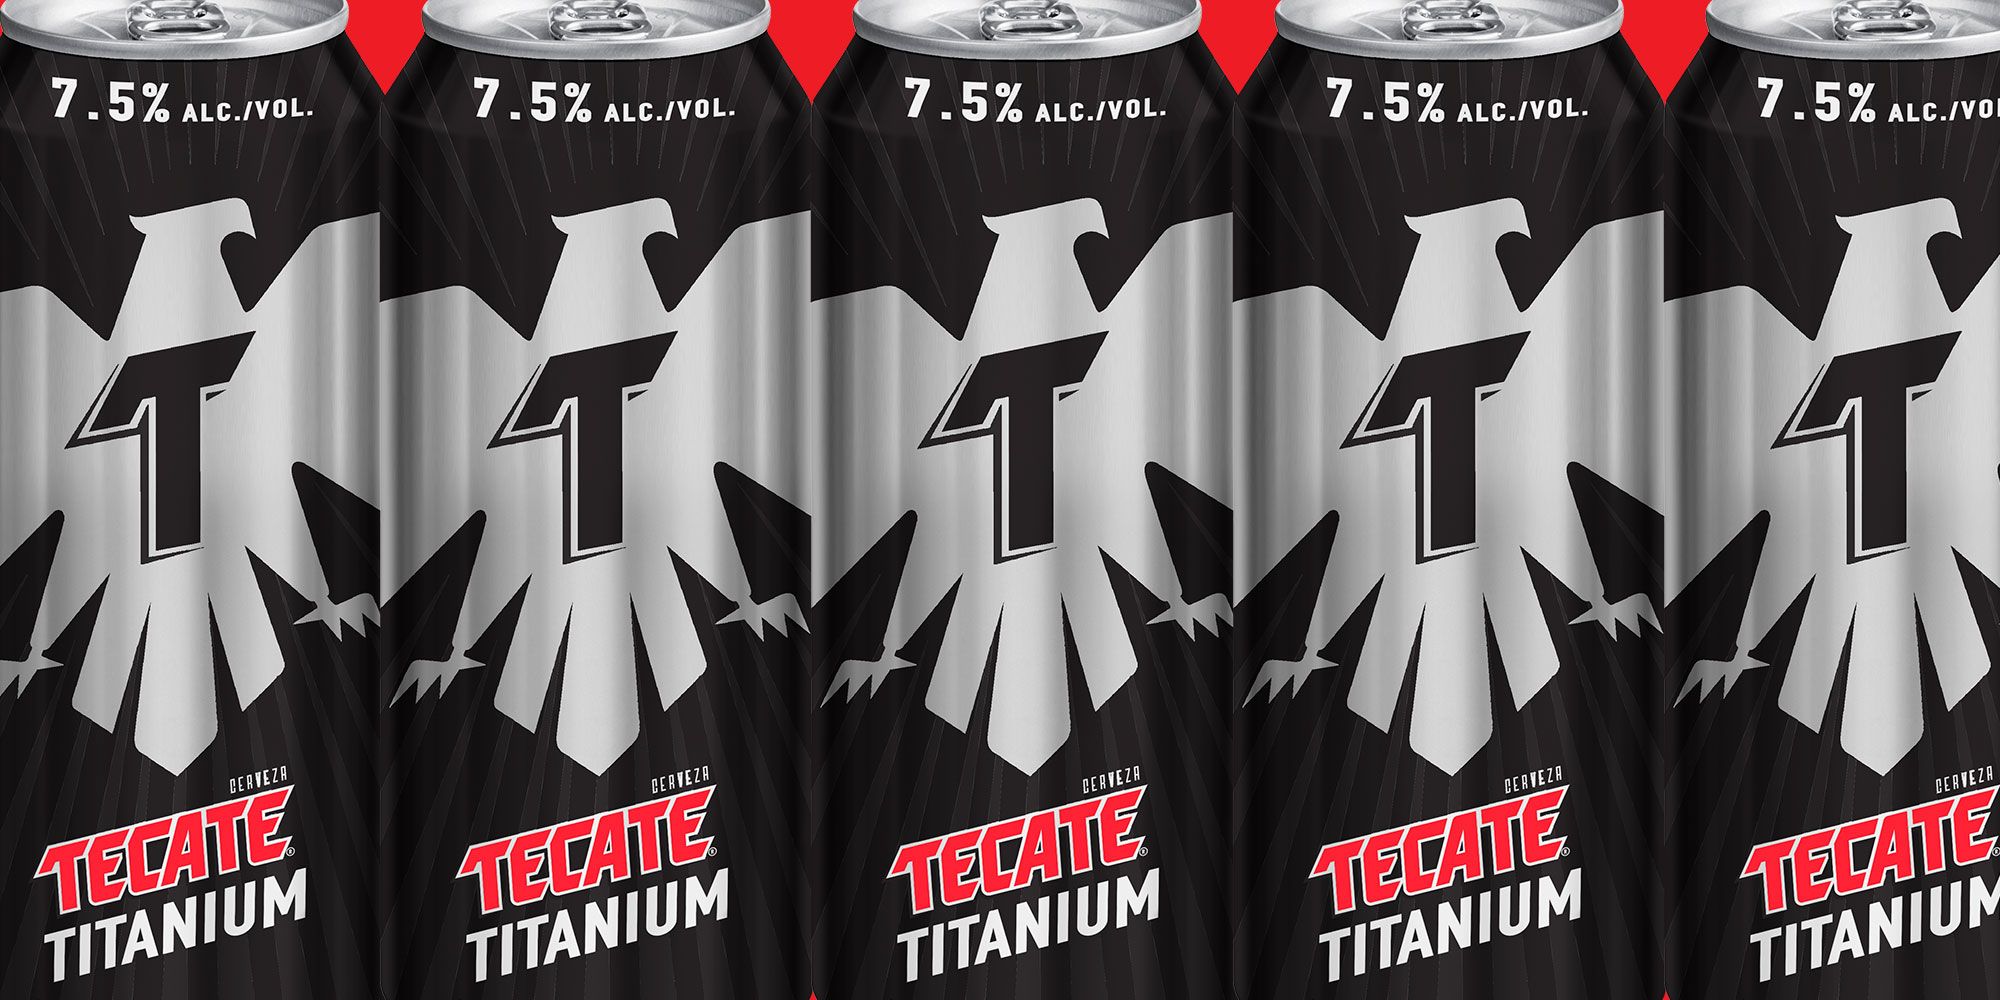 Tecate Titanium Is 24 Ounces And Has Twice The Amount Of Alcohol